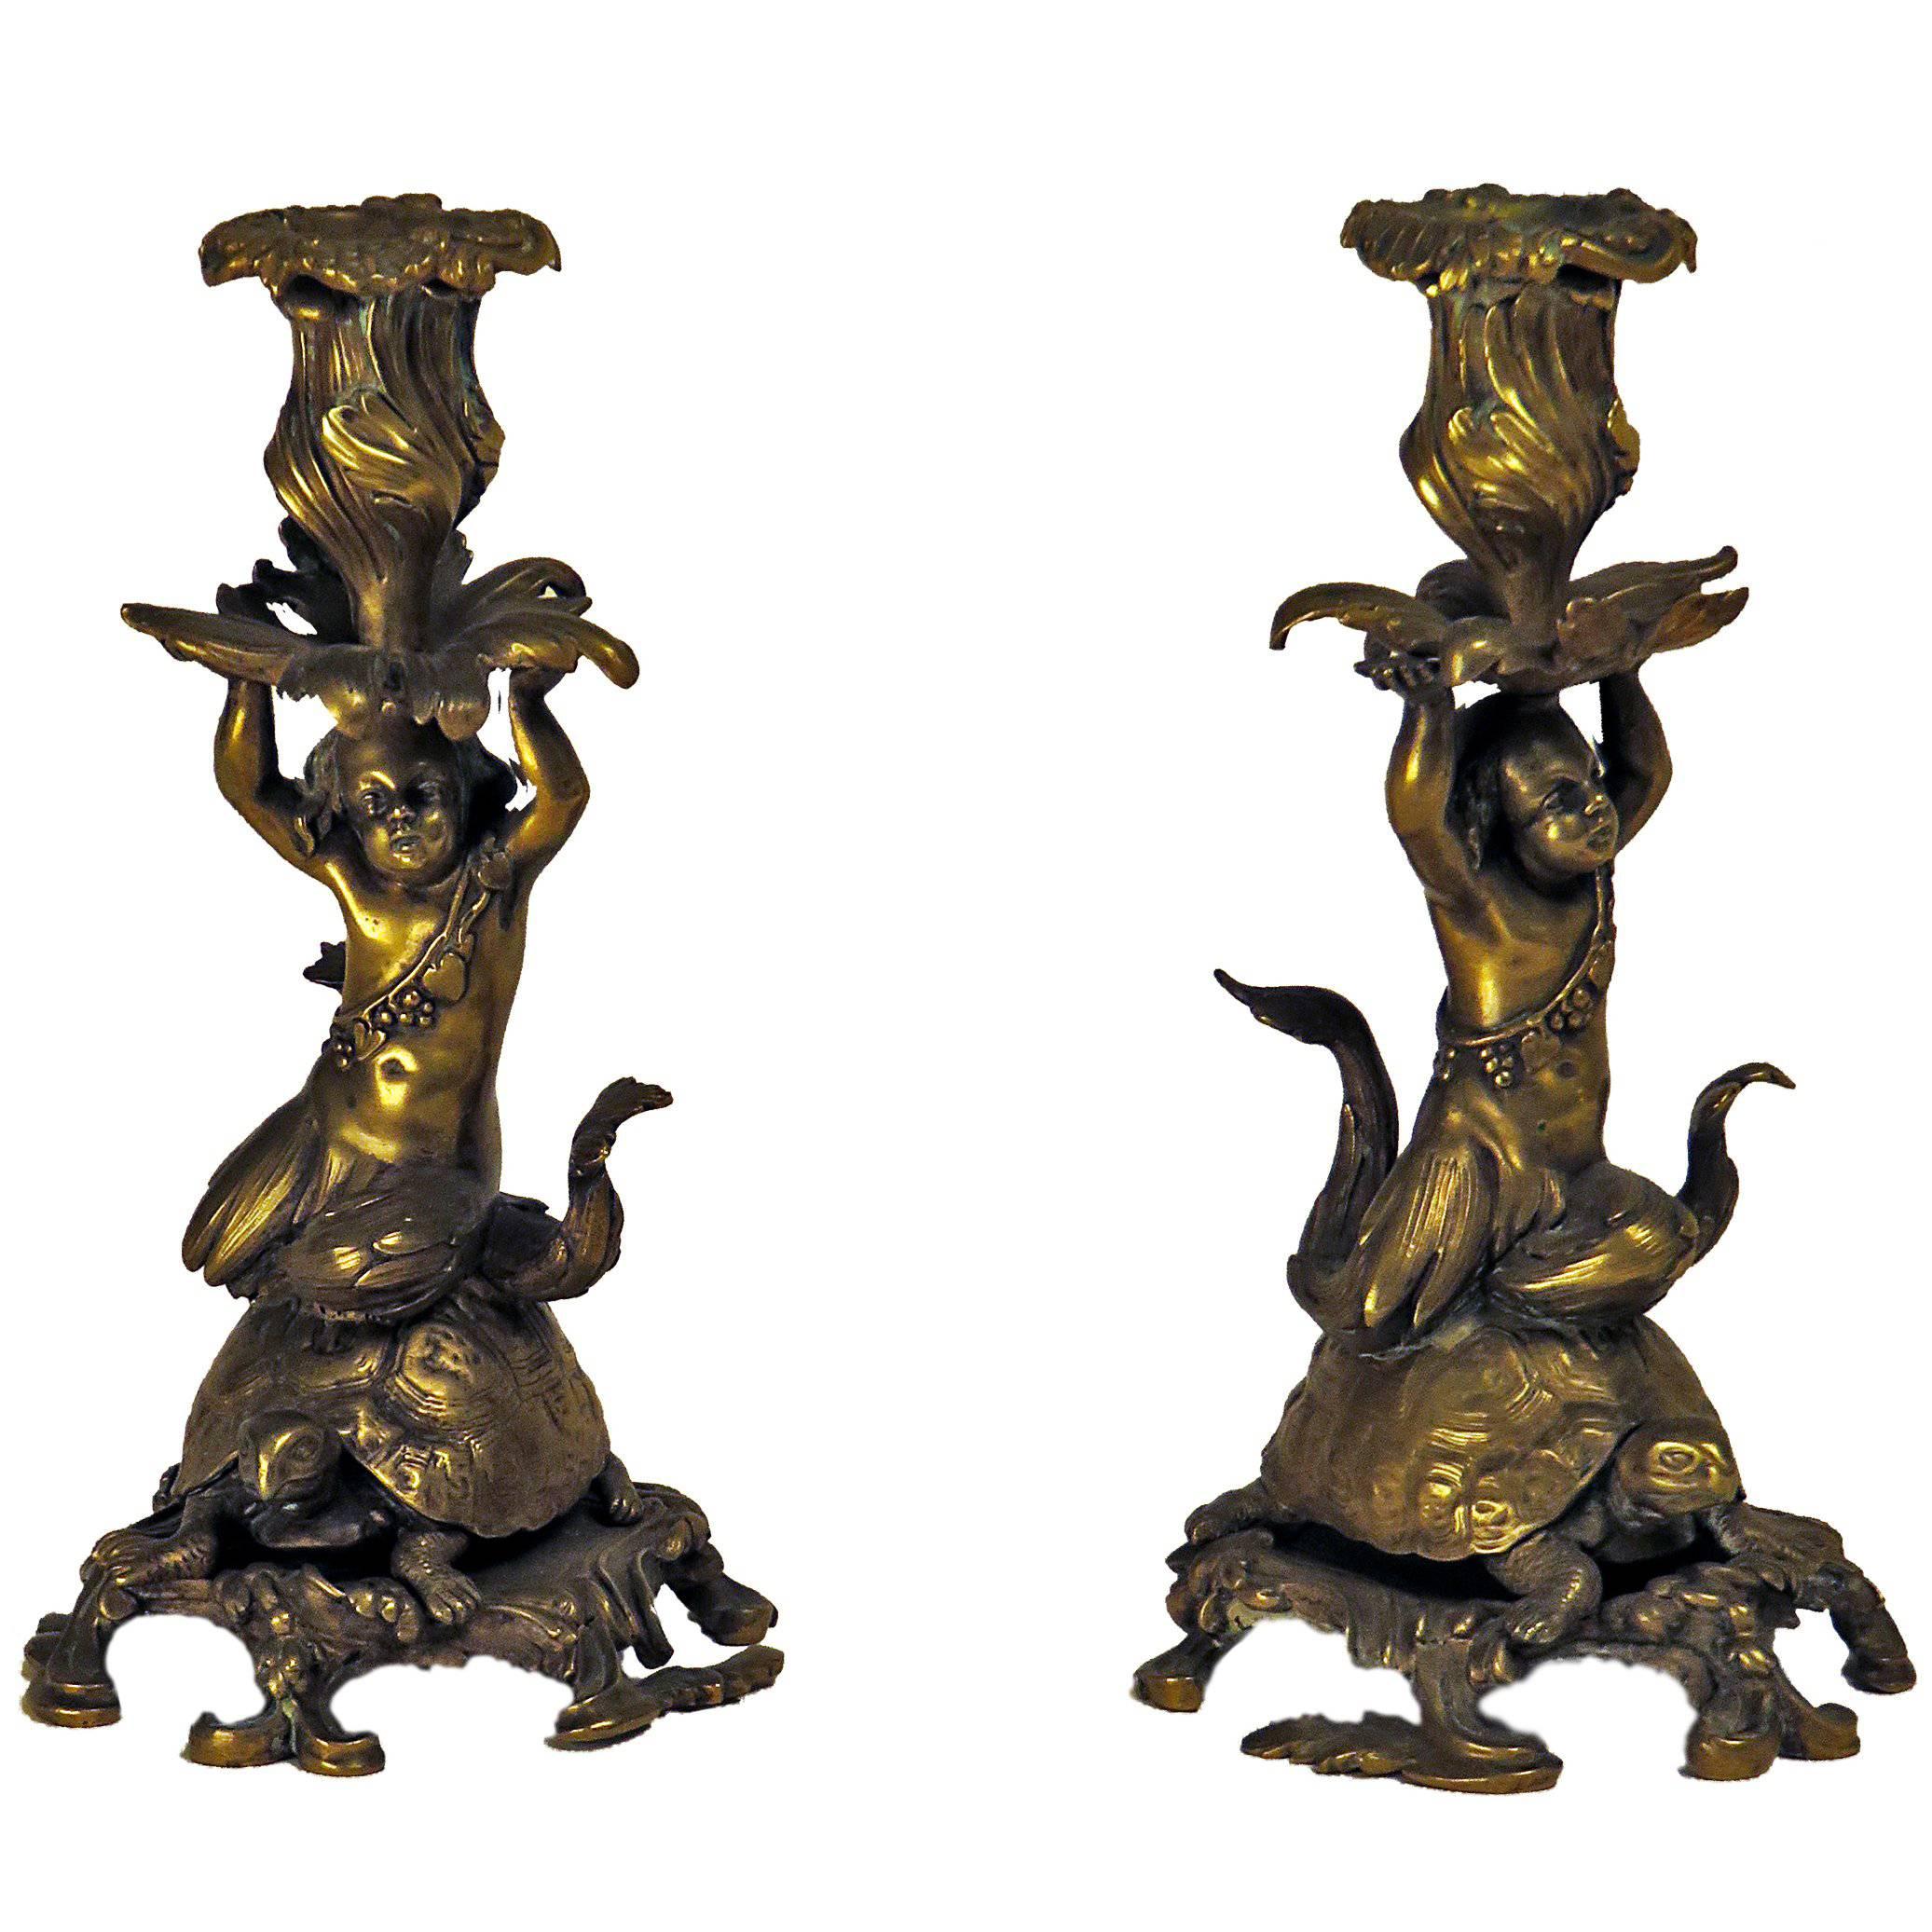 Rare Pair of French Bronze Candlesticks of a Sea Nymph Riding a Turtle, 1840